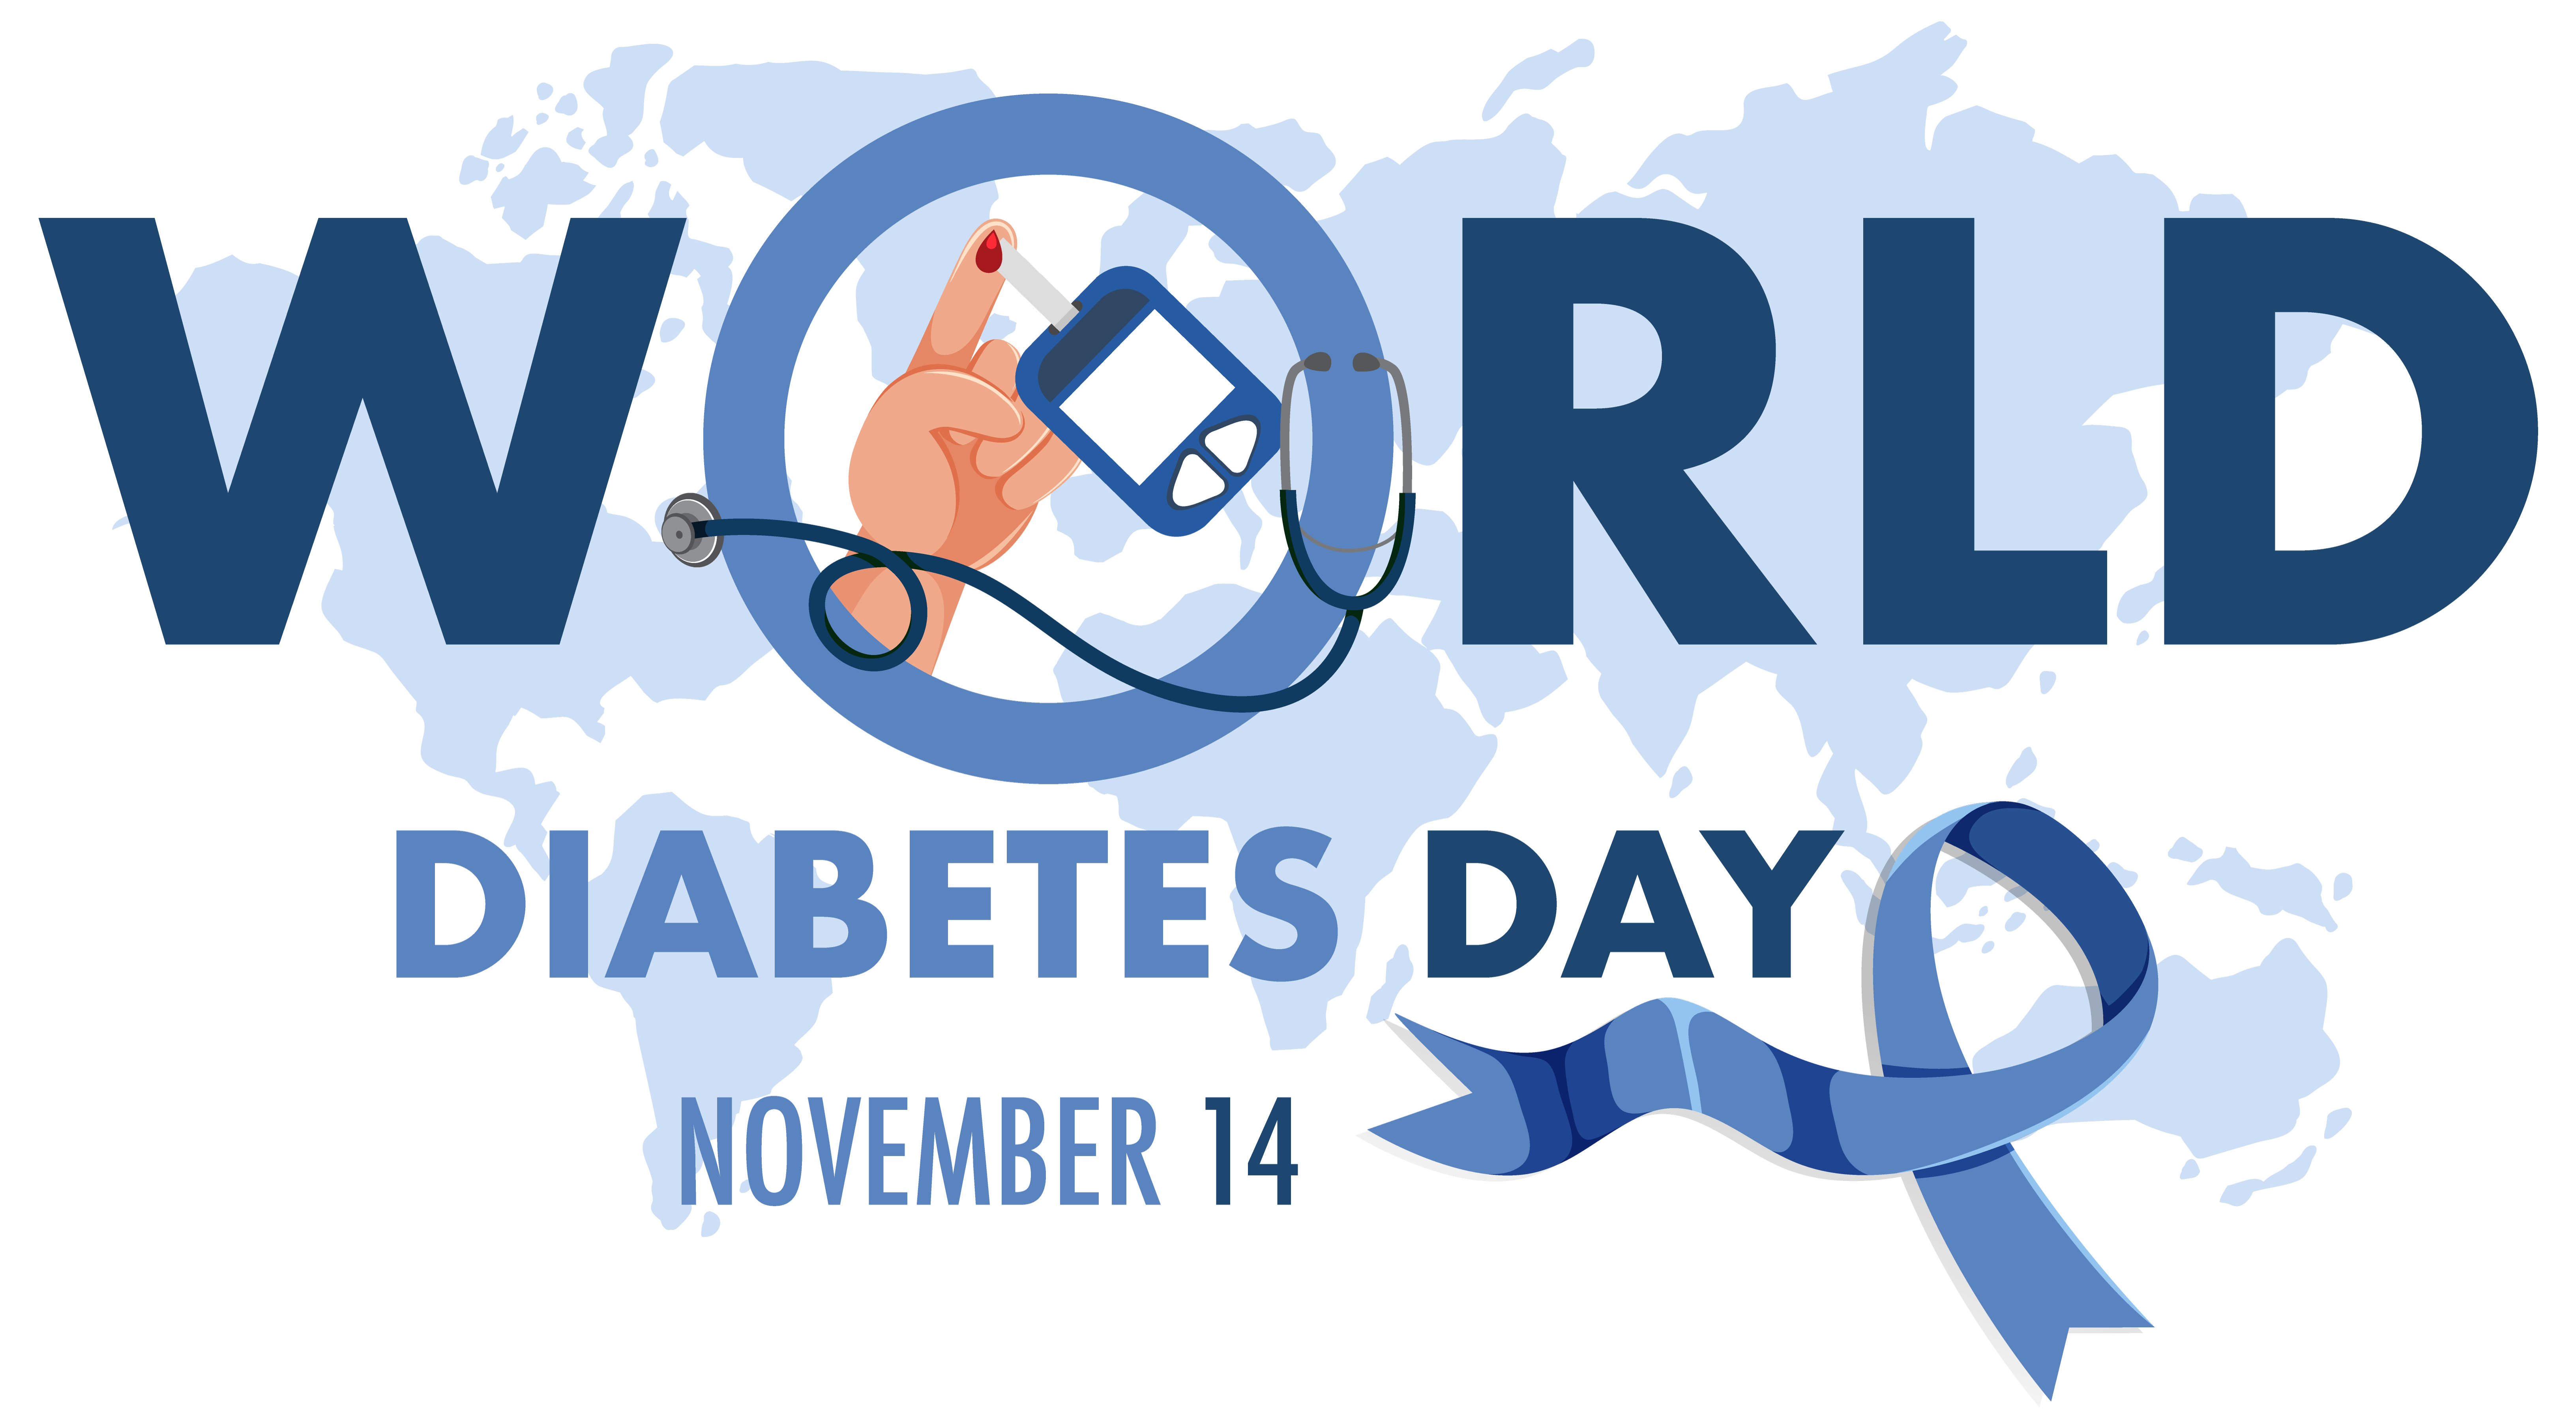 World Diabetes Day logo or banner with the globe on the map 1482479